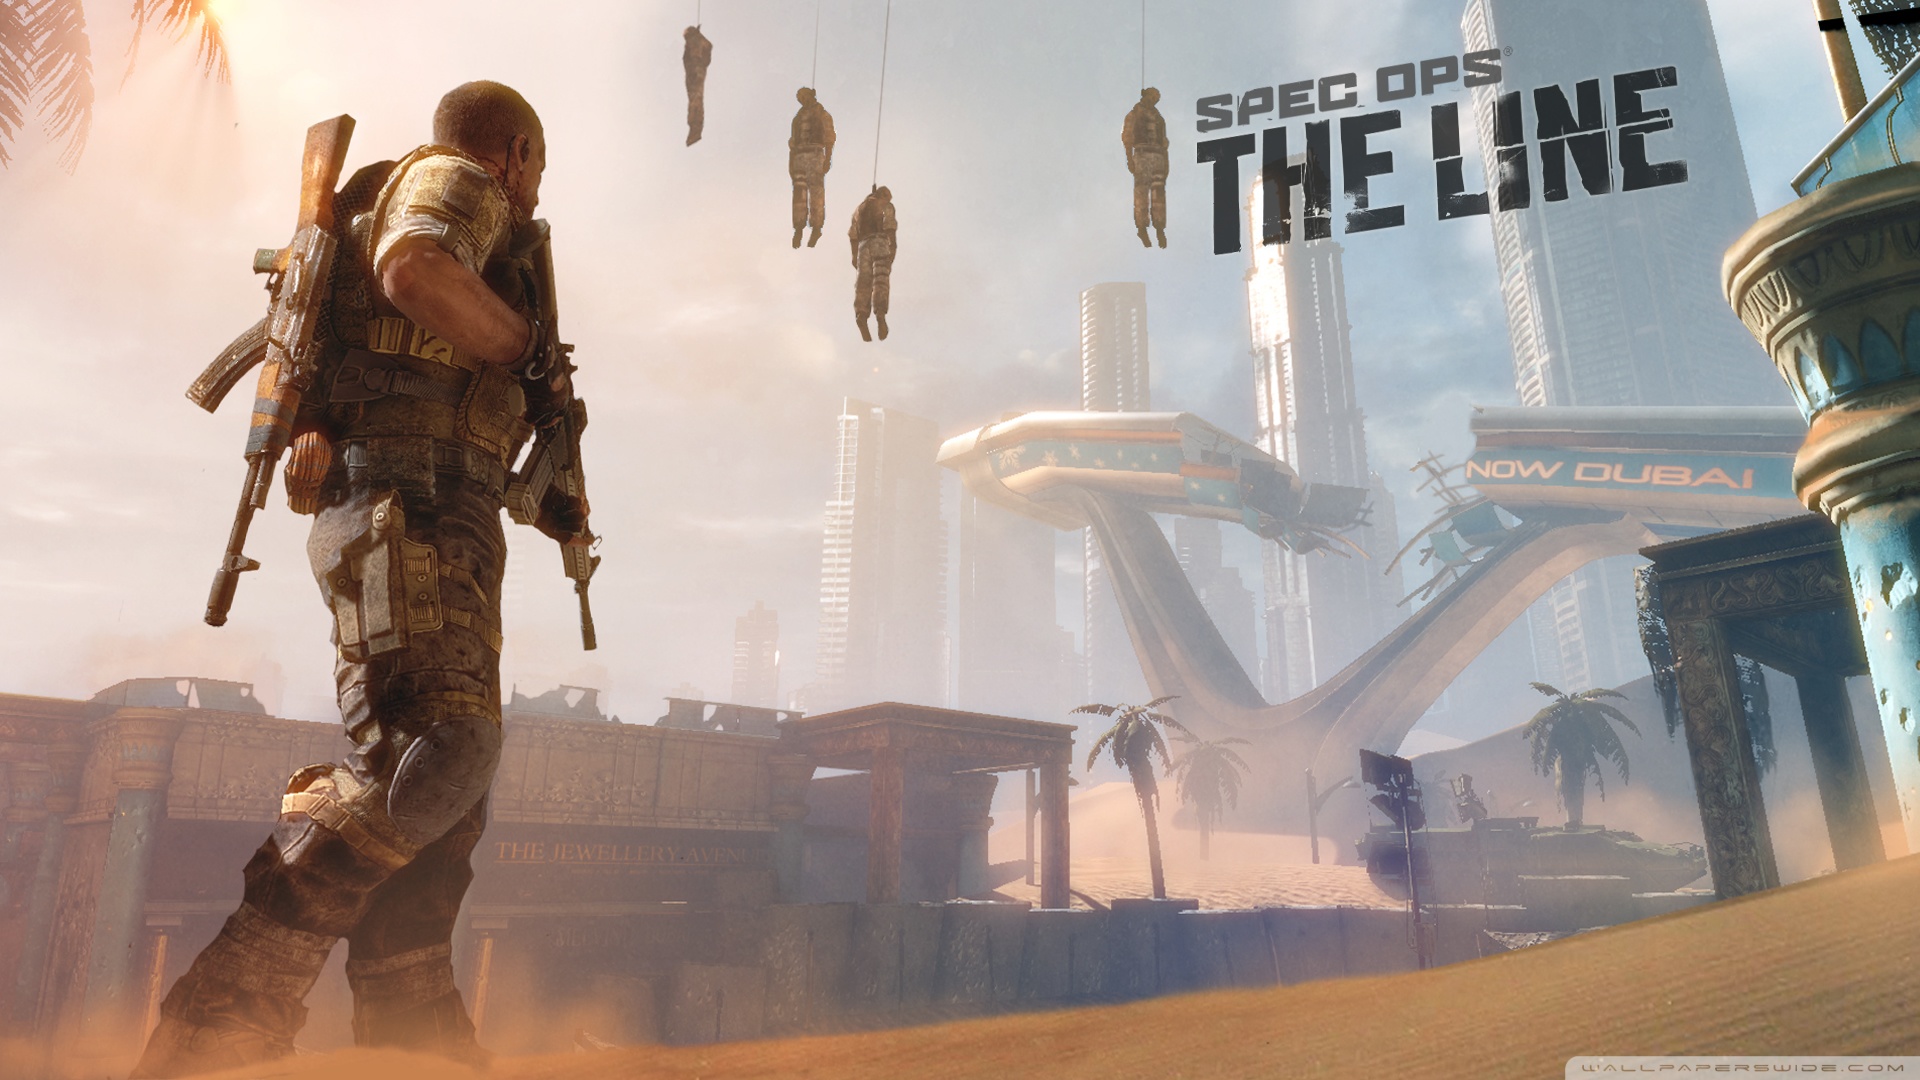 spec ops wallpaper,action adventure game,pc game,shooter game,adventure game,cg artwork